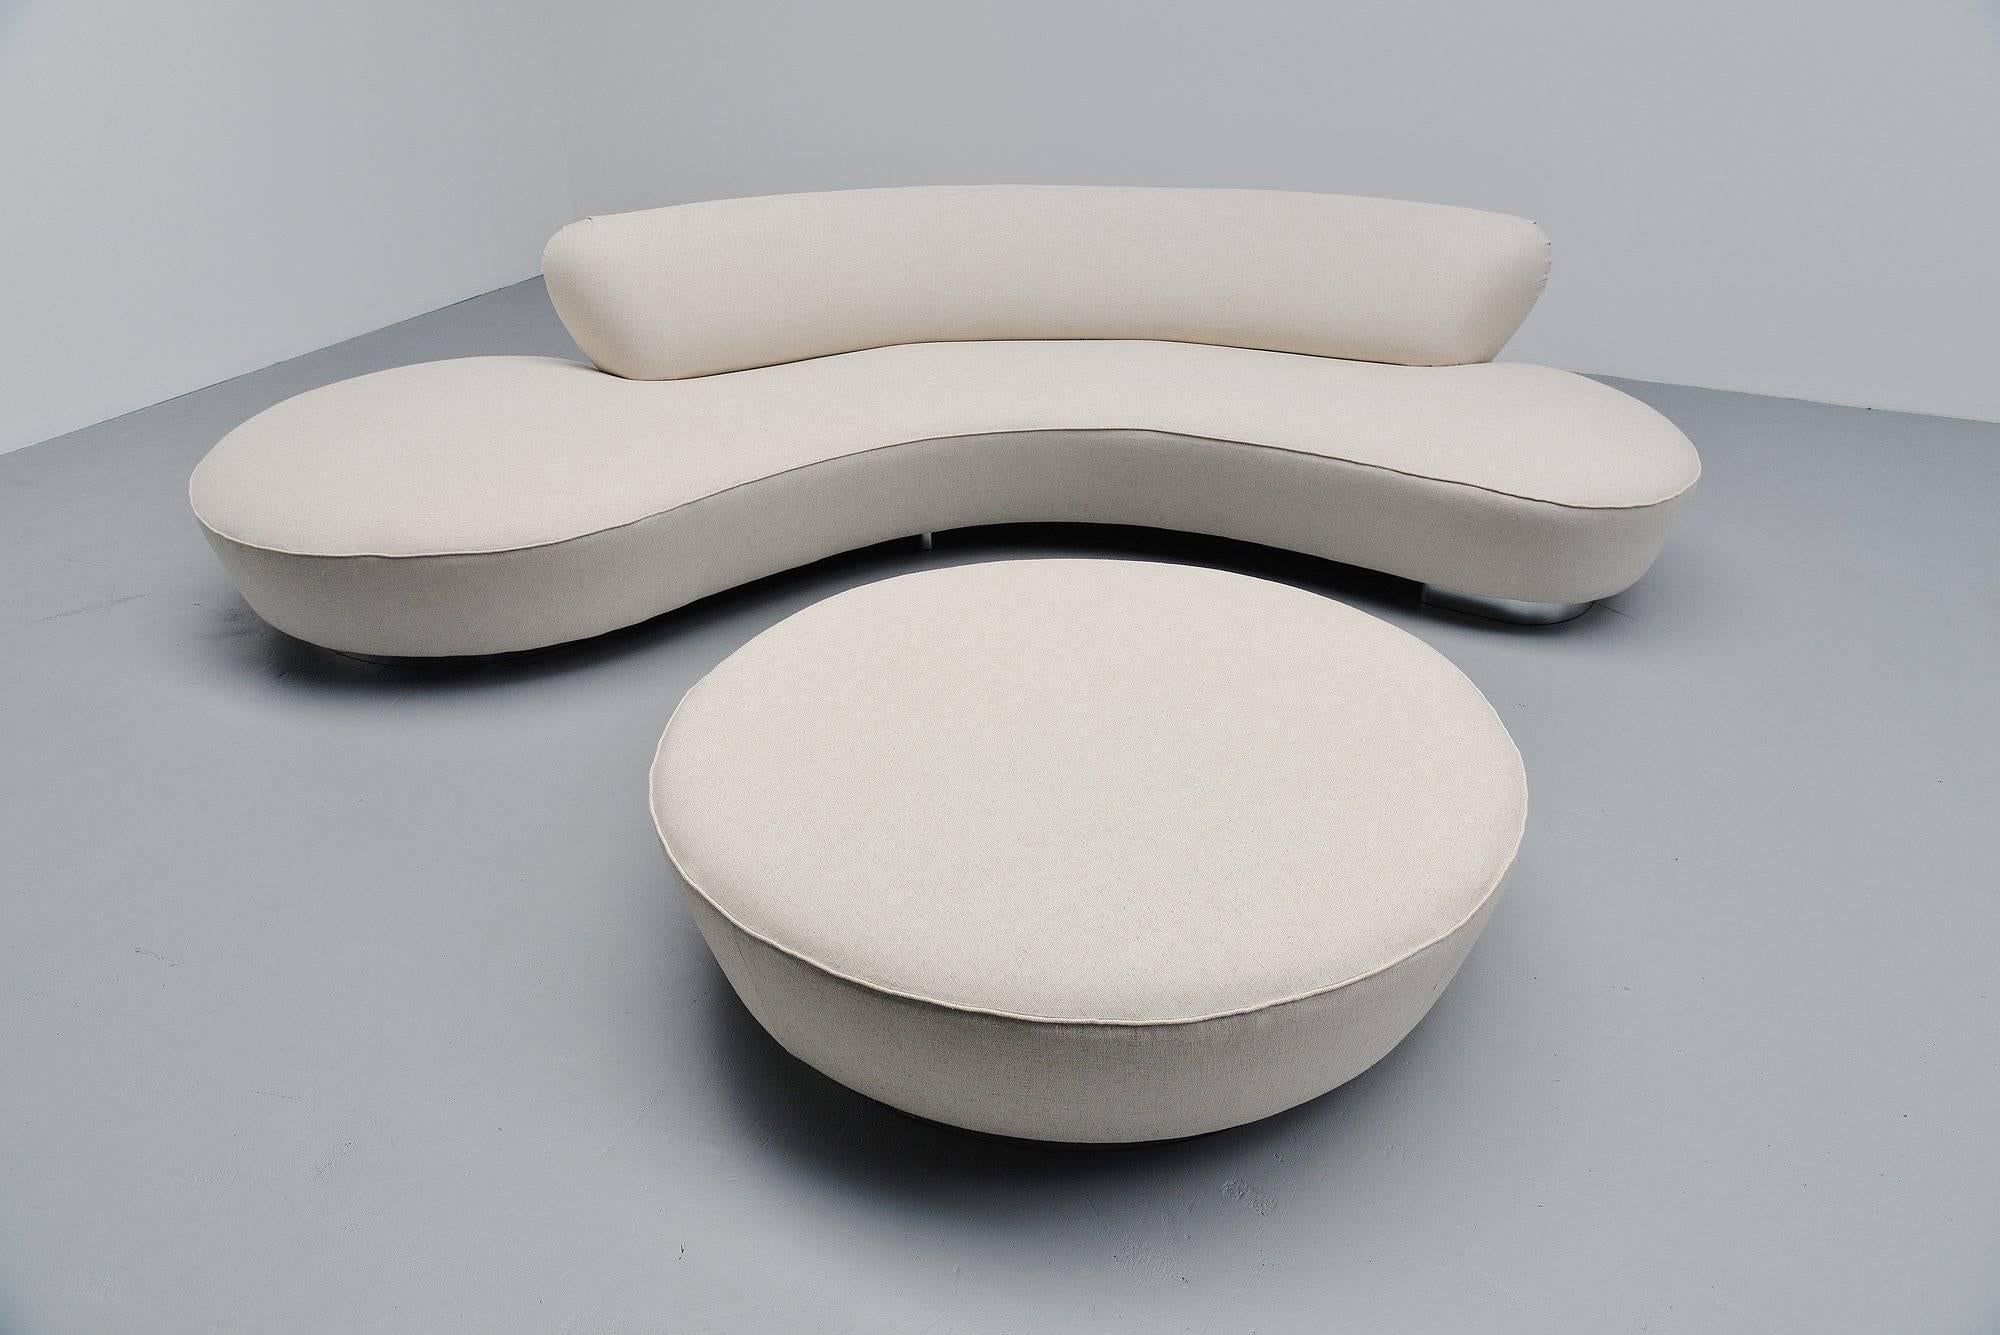 Amazing large lounge sofa designed by Vladimir Kagan for Kagan Dreyfuss, USA, 1990. This sofa was designed by Kagan for Directional and this example is from circa 1990. It is one of the most iconic designs by Kagan emphasizing the both sculptural